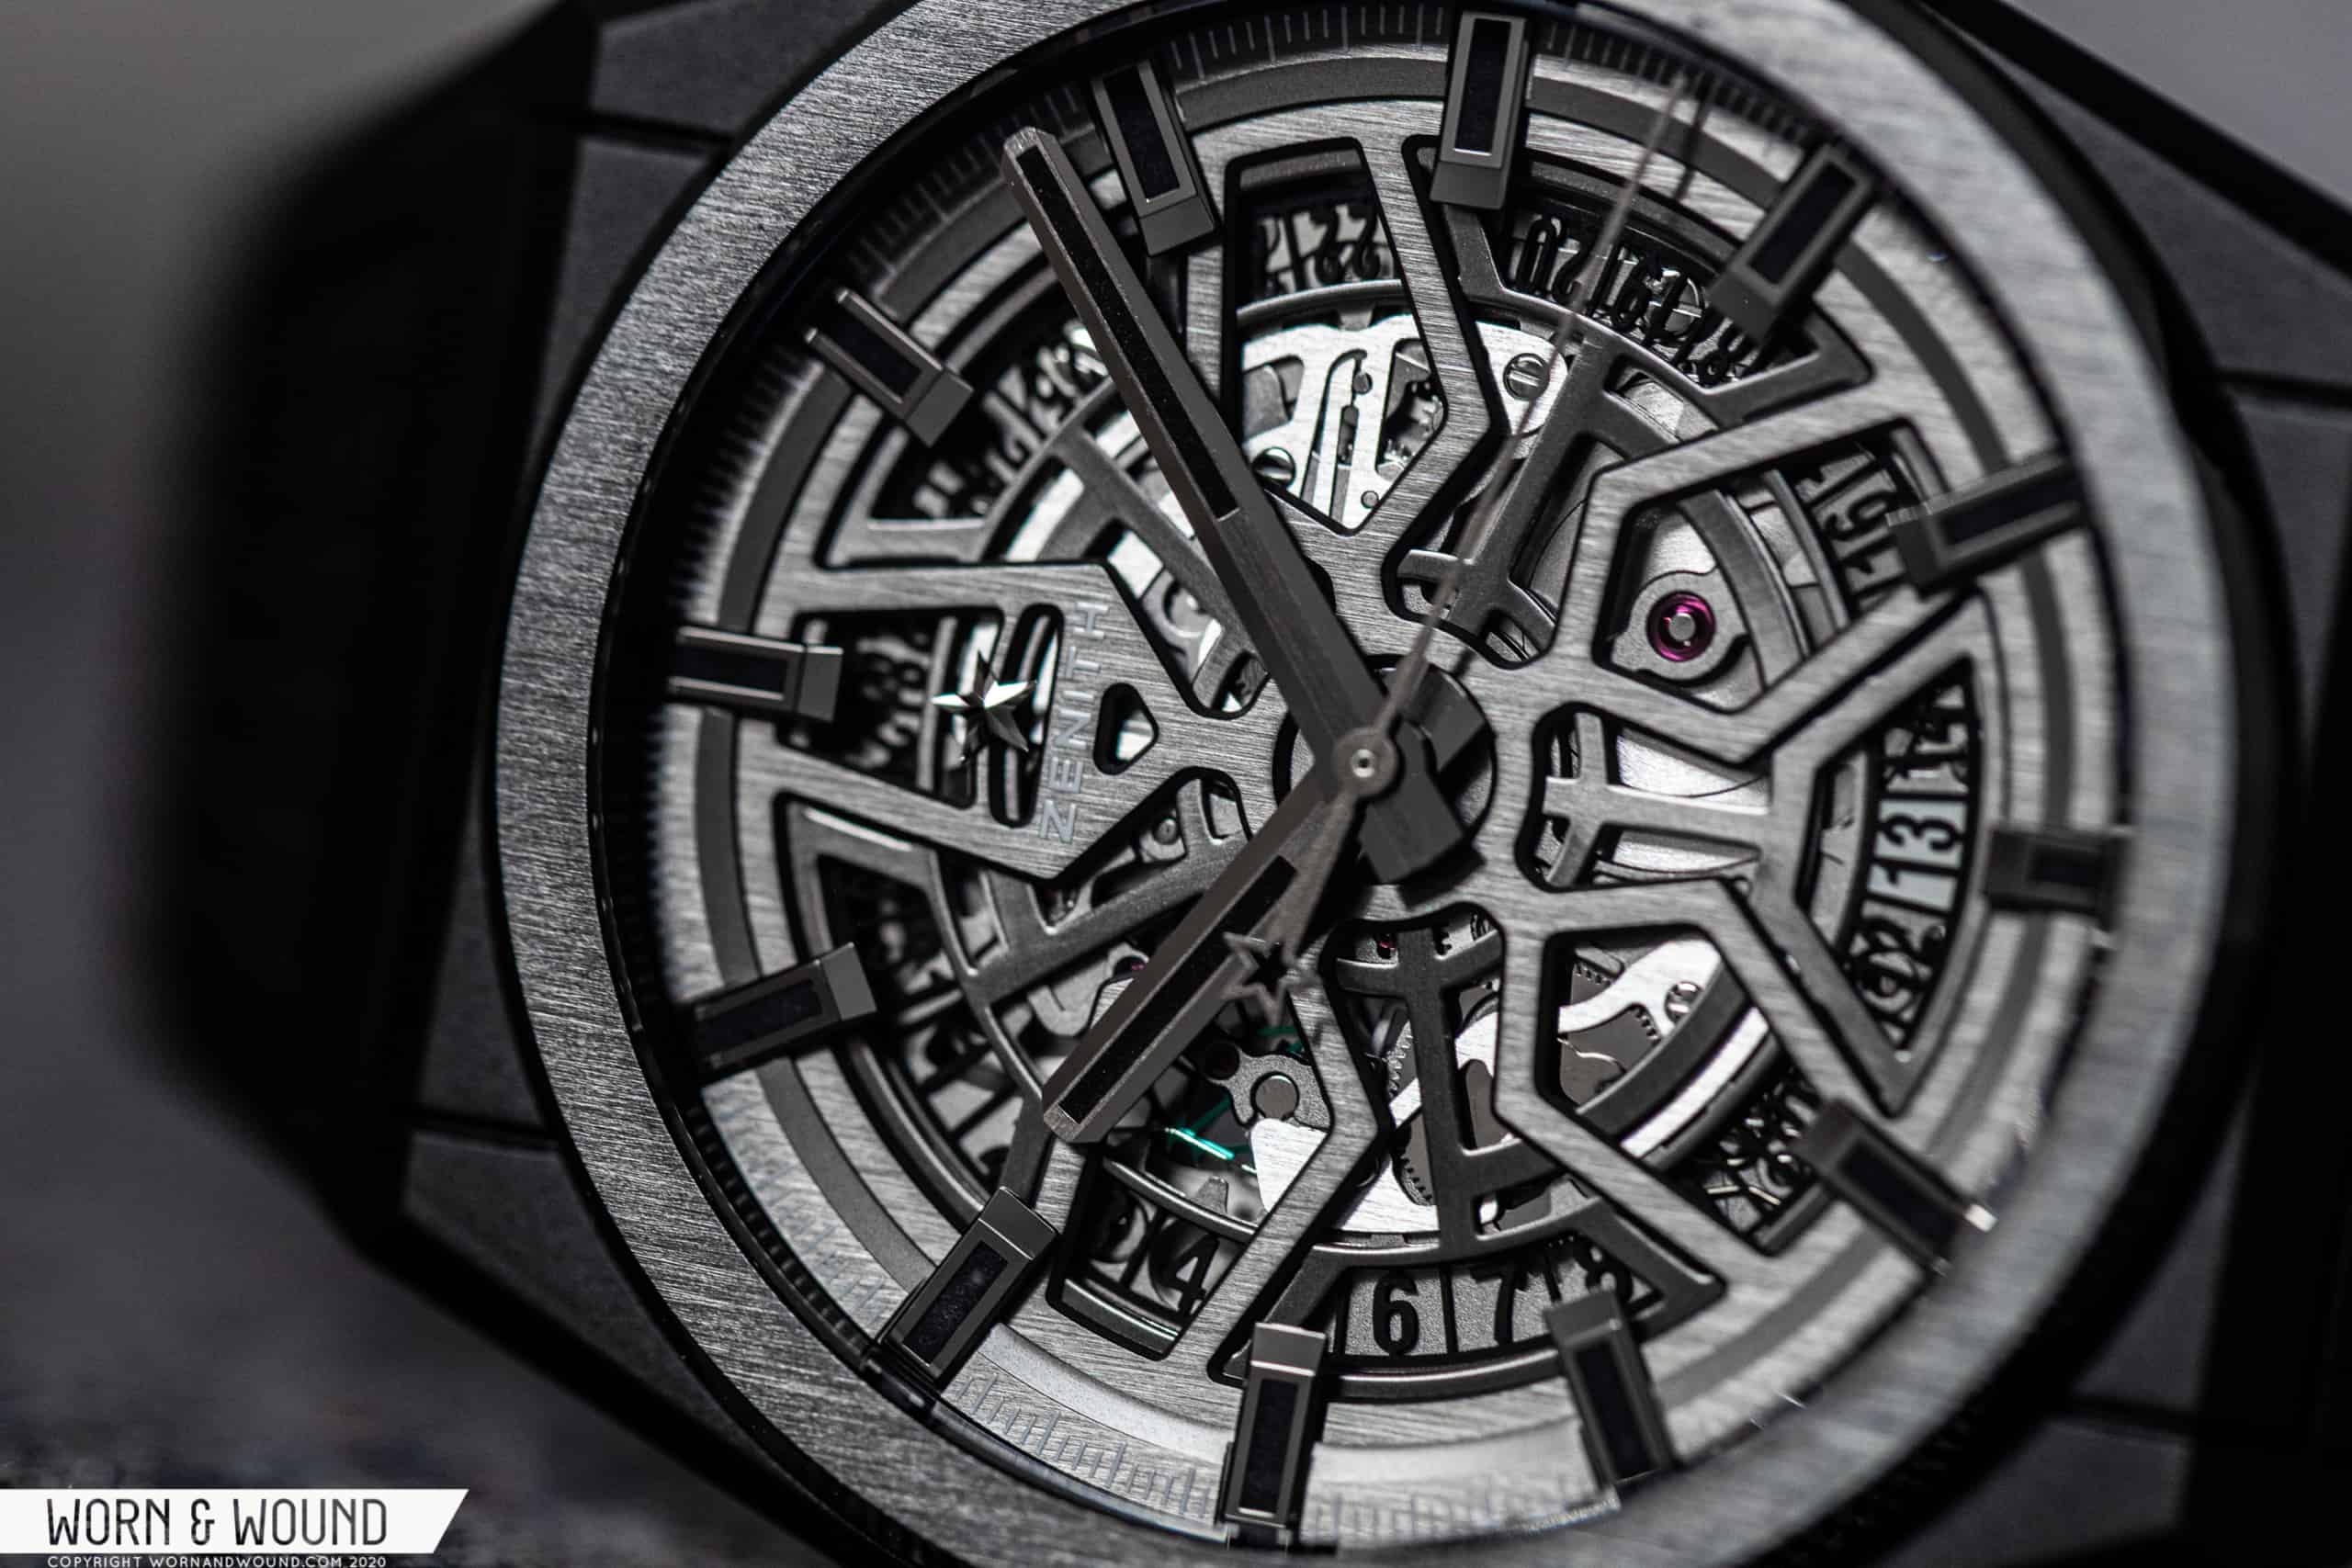 Zenith] Defy Classic Ceramic - Skeletons Can Be More Than Just